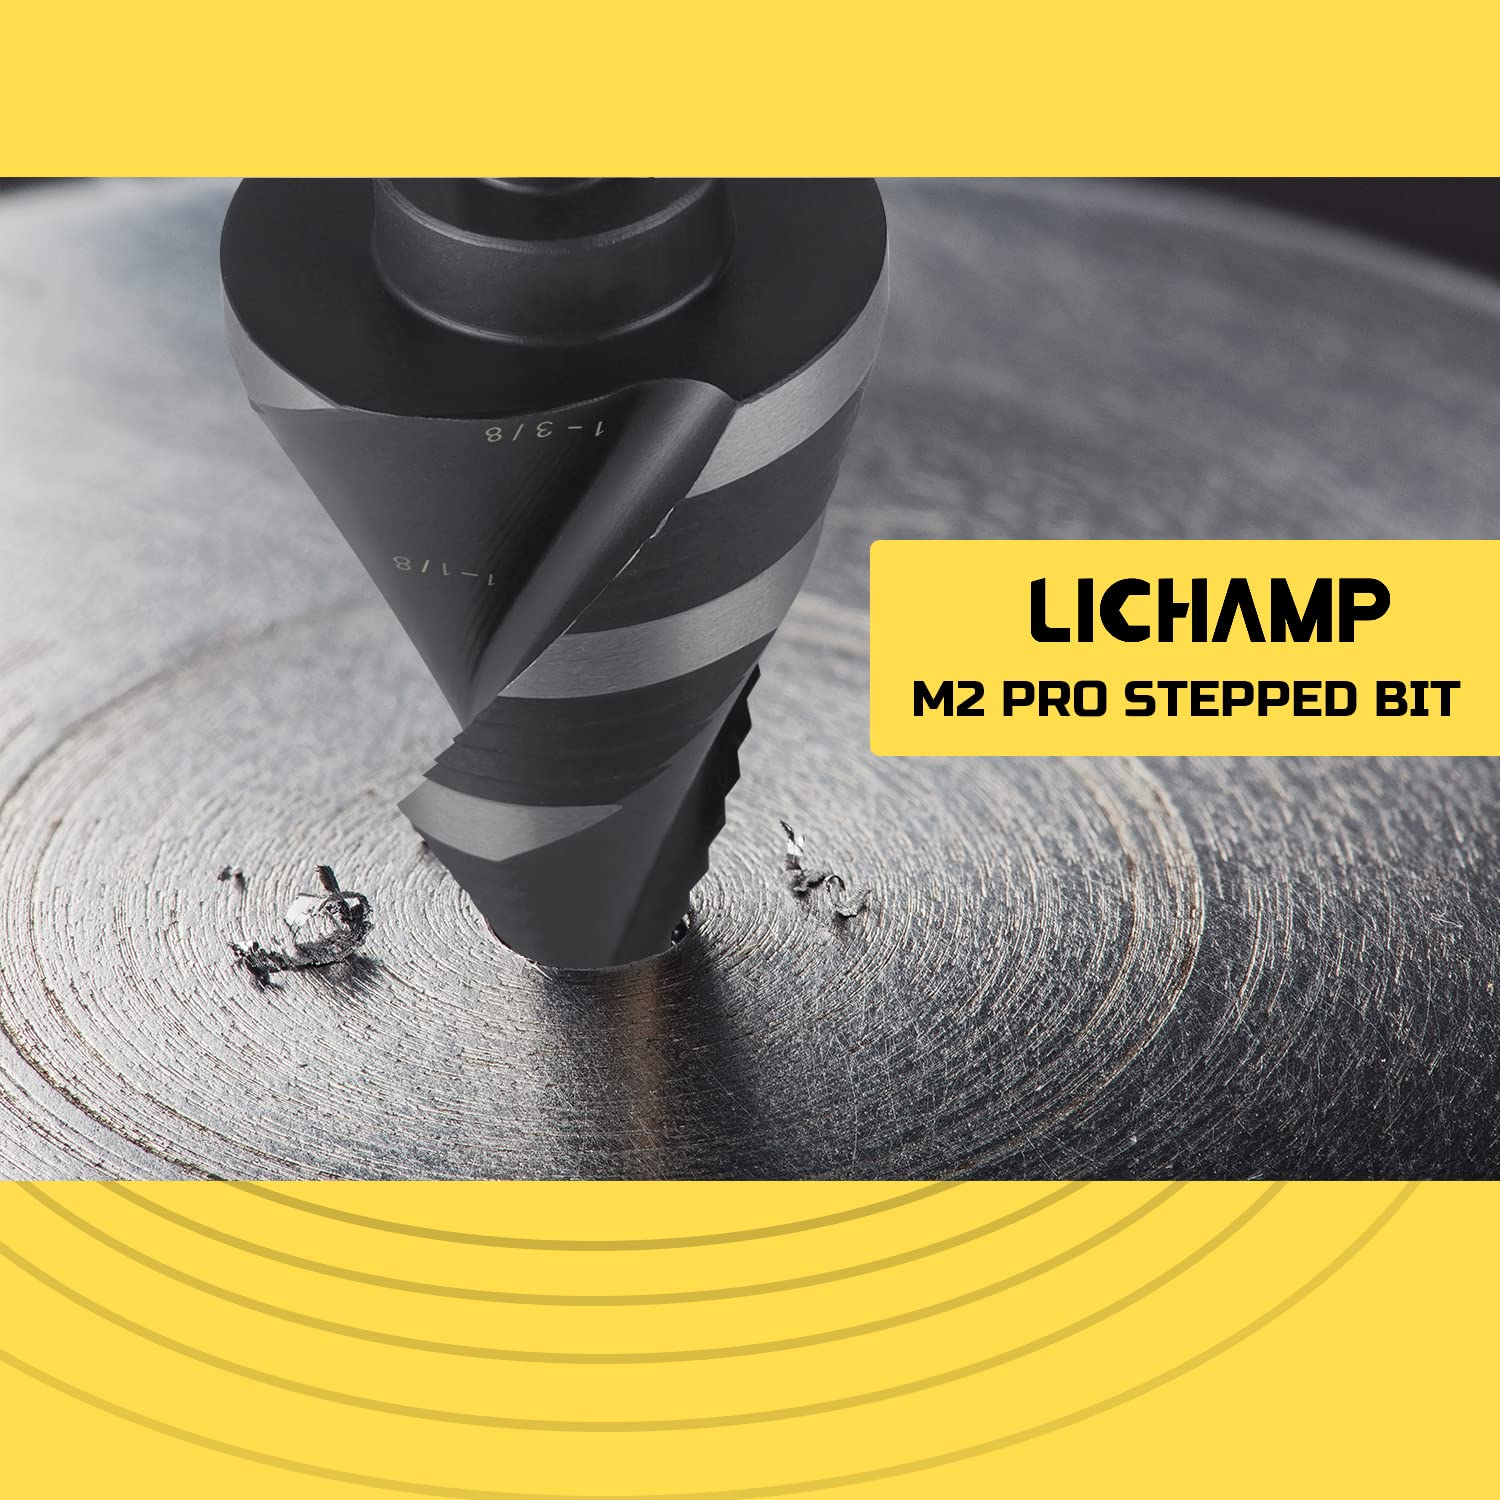 Lichamp Unibit Step Drill Bit for Metal, Genuine M2 Drill Stepper Bit for Hard Metal Heavy Duty, 19 Sizes from 3/16" to 1-3/8", Spiral Grooved with Hex Drive, C1BK